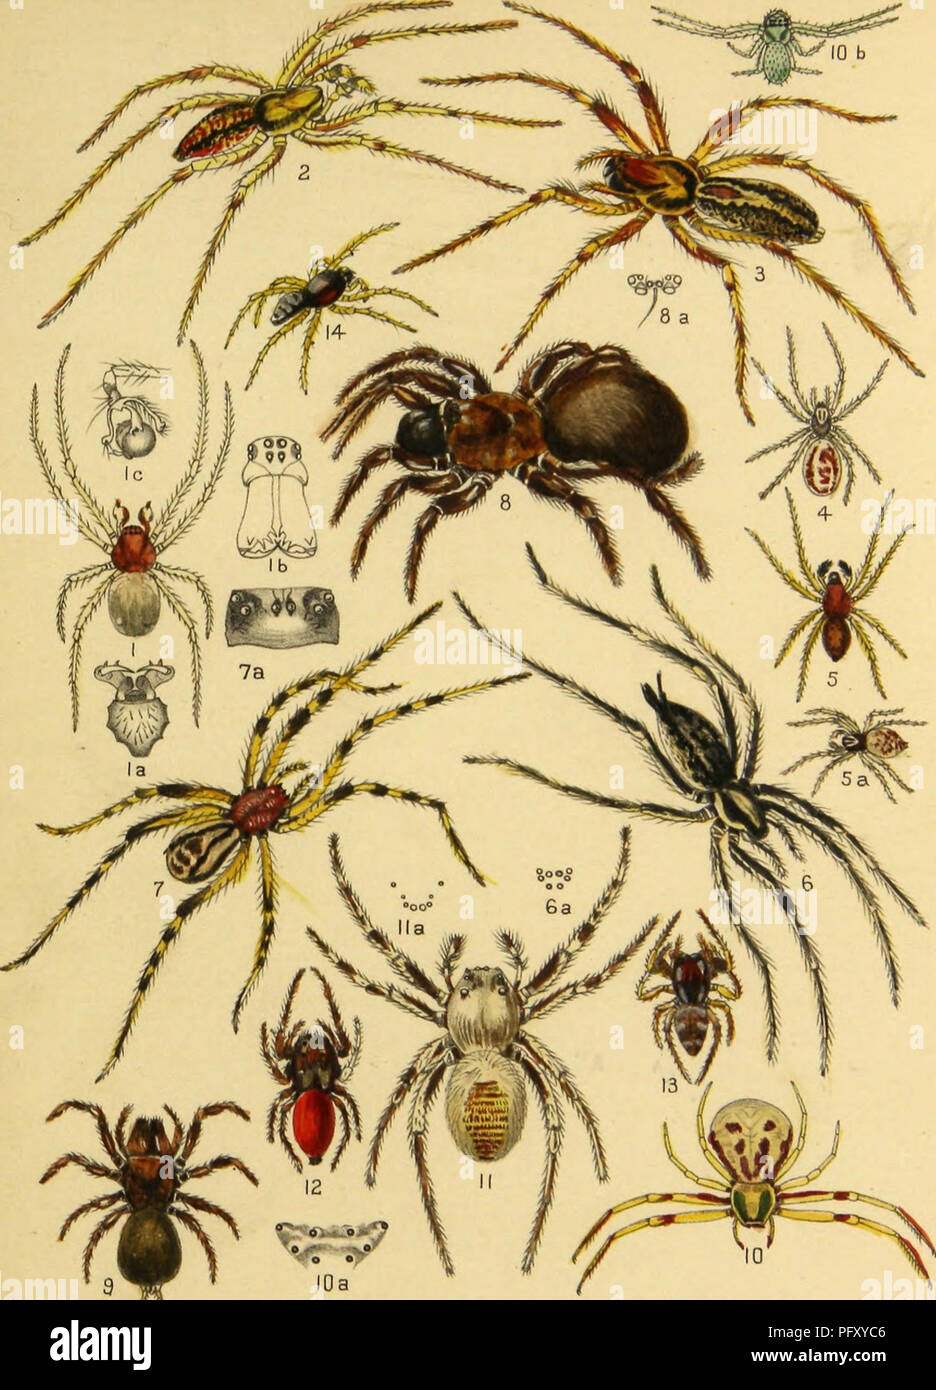 . American spiders and their spinning work. A natural history of the orbweaving spiders of the United States, with special regard to their industry and habits. Spiders. Vol. Ill American Spiders. PLATE XXIX.. I.Theridium Faxi. 2.3. Agalena curta. 4,5. Dictyna philoteichous. 6, Agalena naevia. 7, Segestria canities. 8,Cteni2aCalifomica. 9. Atypus Abboti. IO,Misumena vatia. II, Phidippus opifex. 12, P. Johnsoni. l3,Zygoballus bettini. l4,Astia vittata.. Please note that these images are extracted from scanned page images that may have been digitally enhanced for readability - coloration and appe Stock Photo